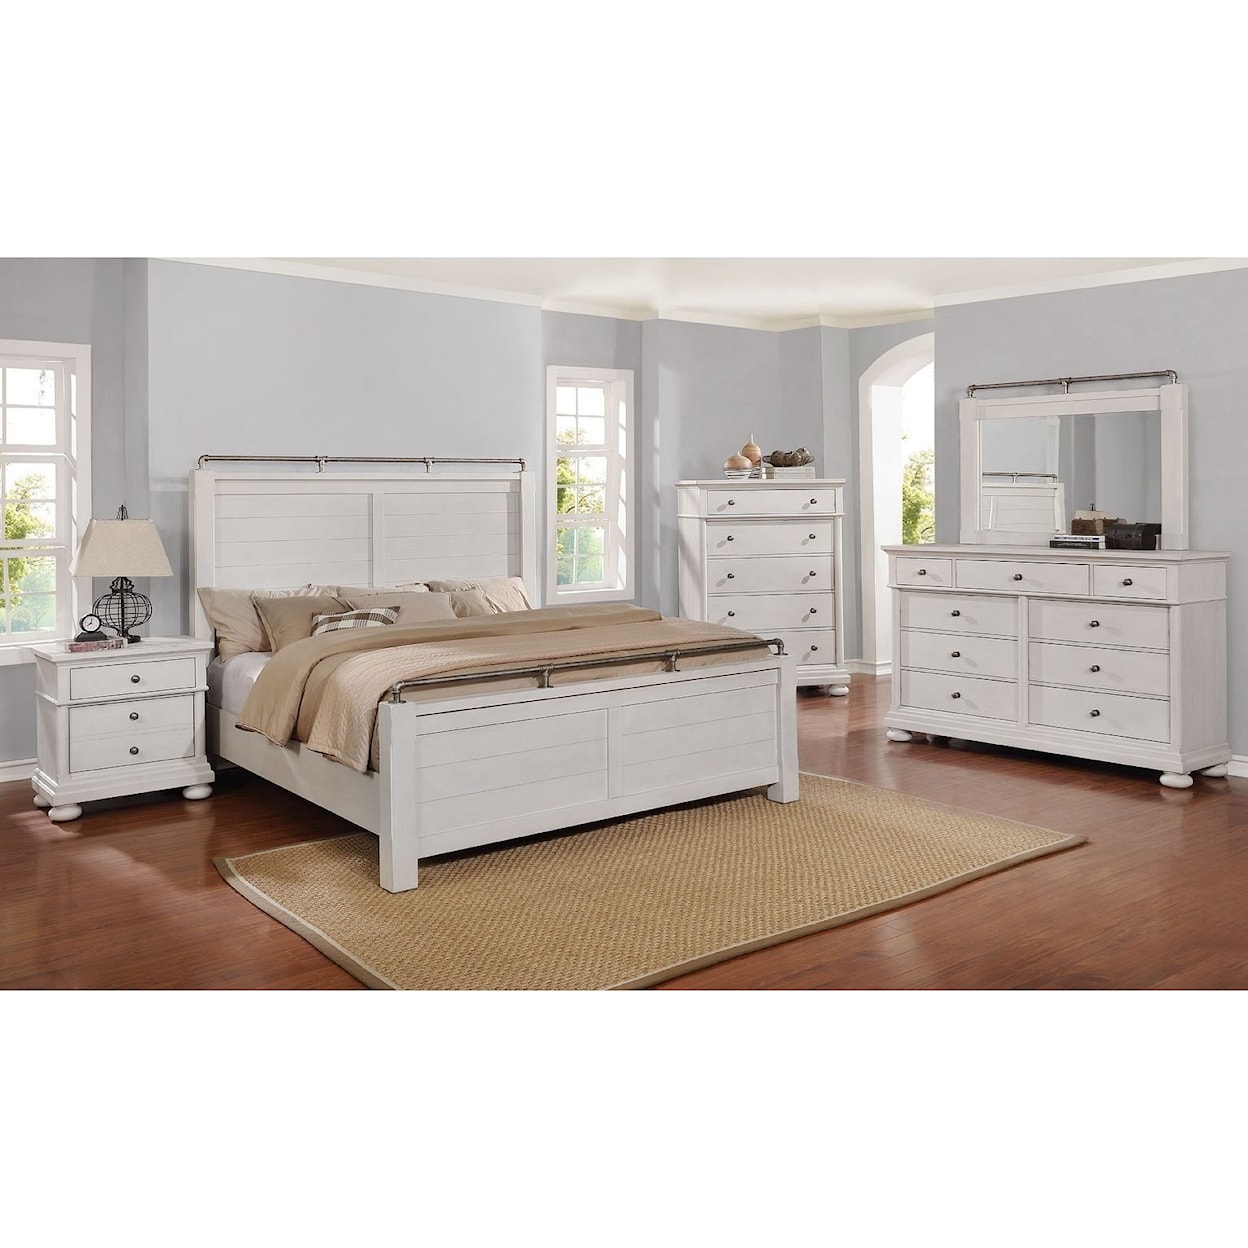 Avalon Furniture Bellville - White Queen Bedroom Group